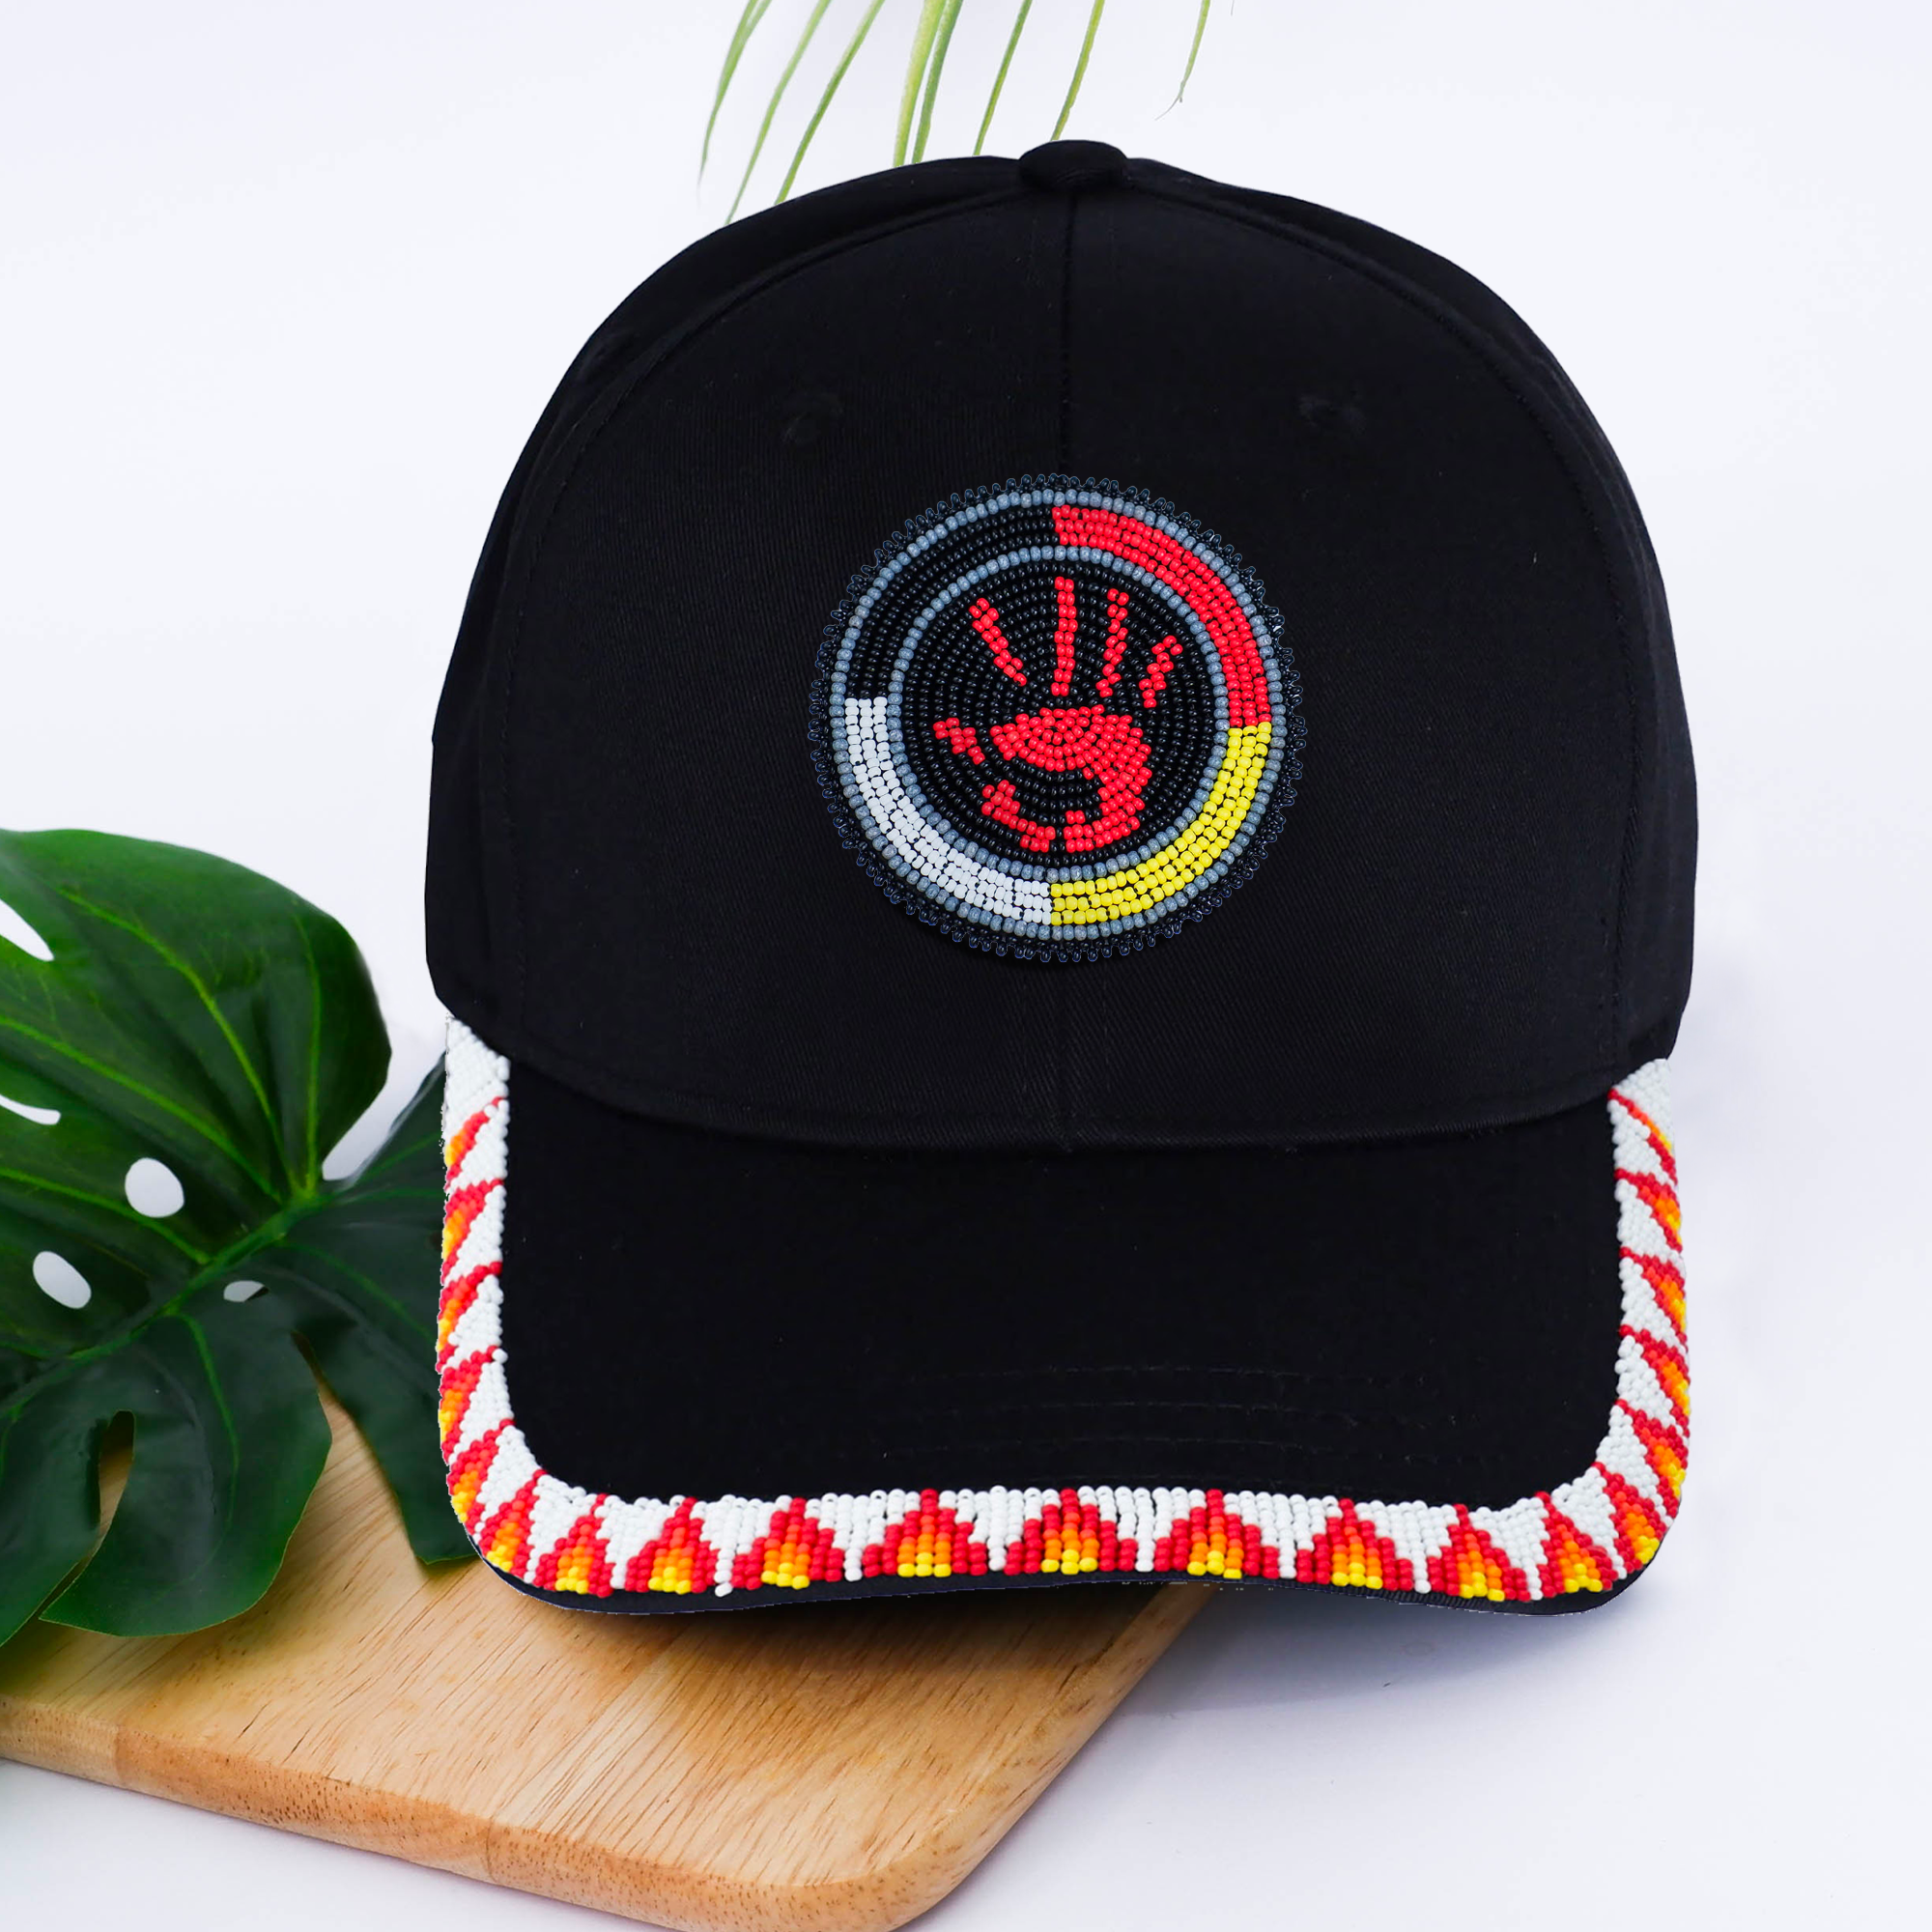 SALE 50% OFF - MMIW Feathers Cotton Unisex Baseball Cap With Beaded Patch Brim Native American Style